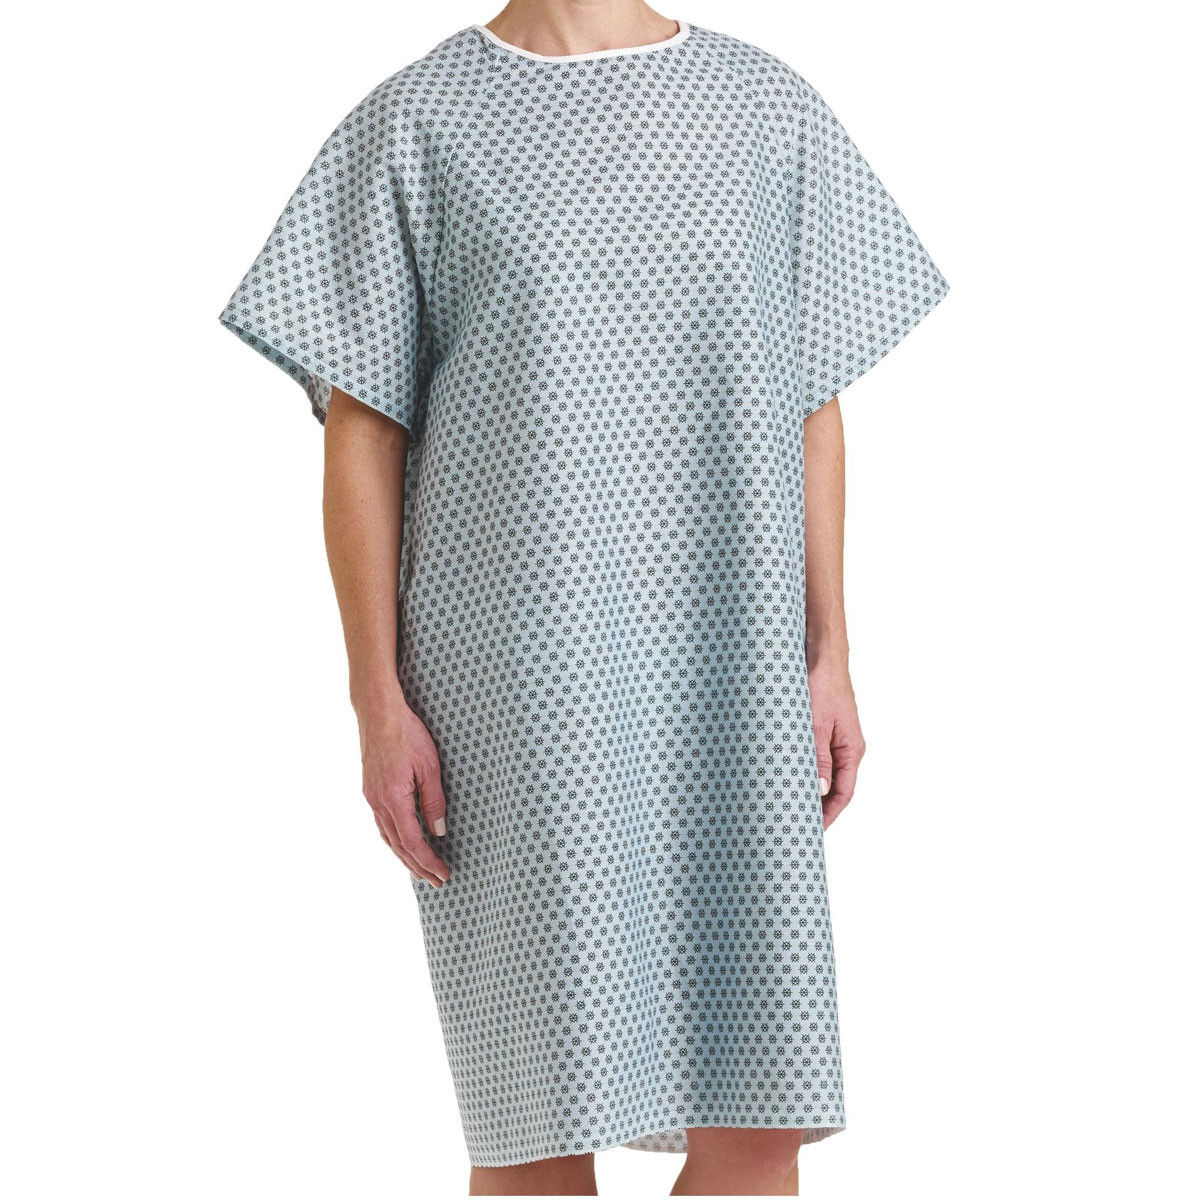 Do you offer printing on hospital gowns?